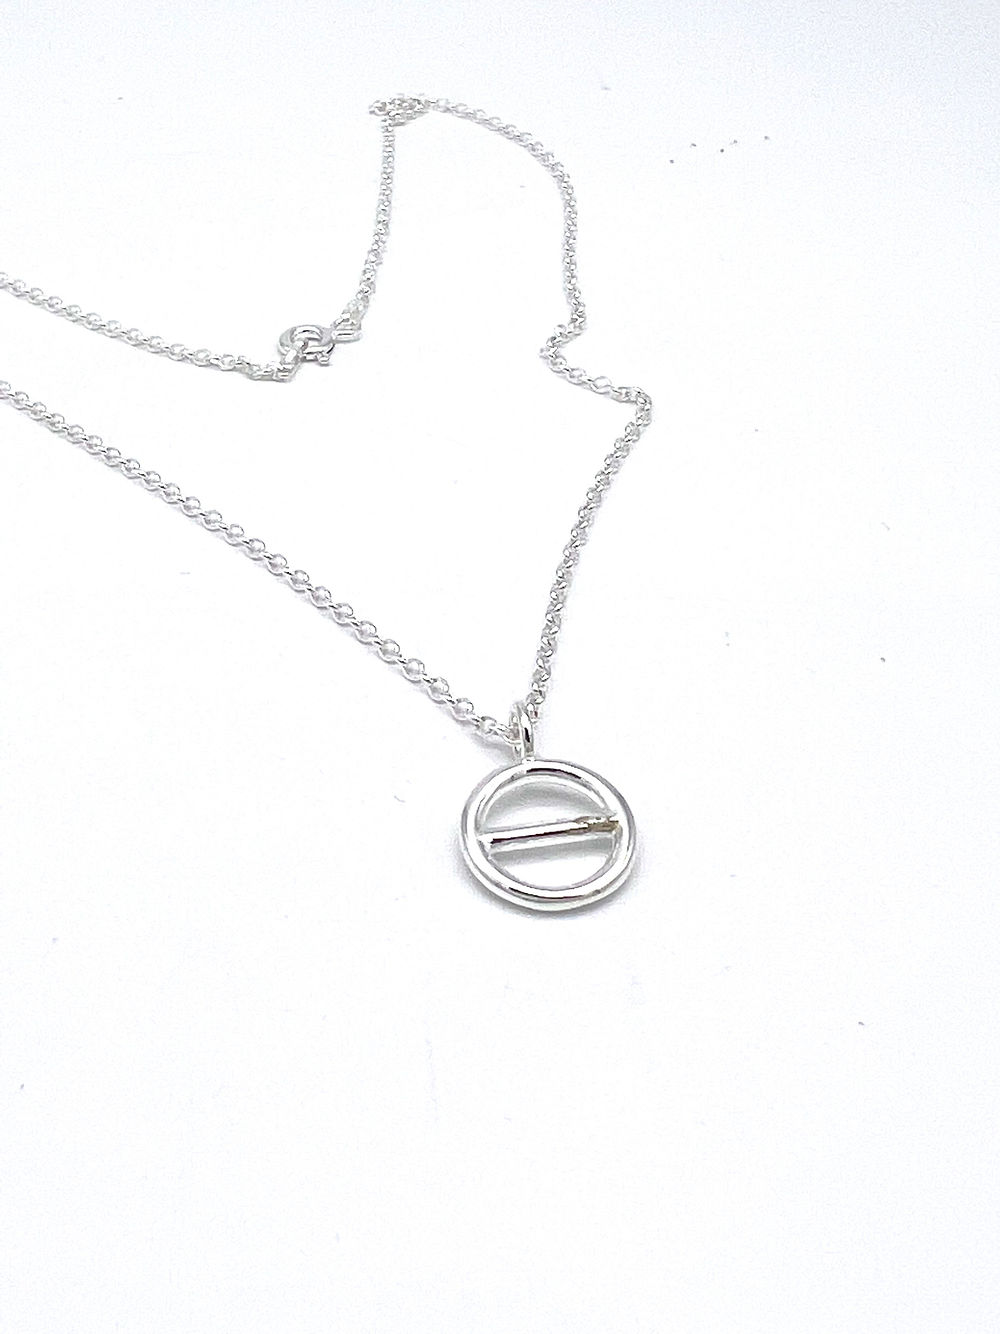 THE SALT OF LIFE necklace